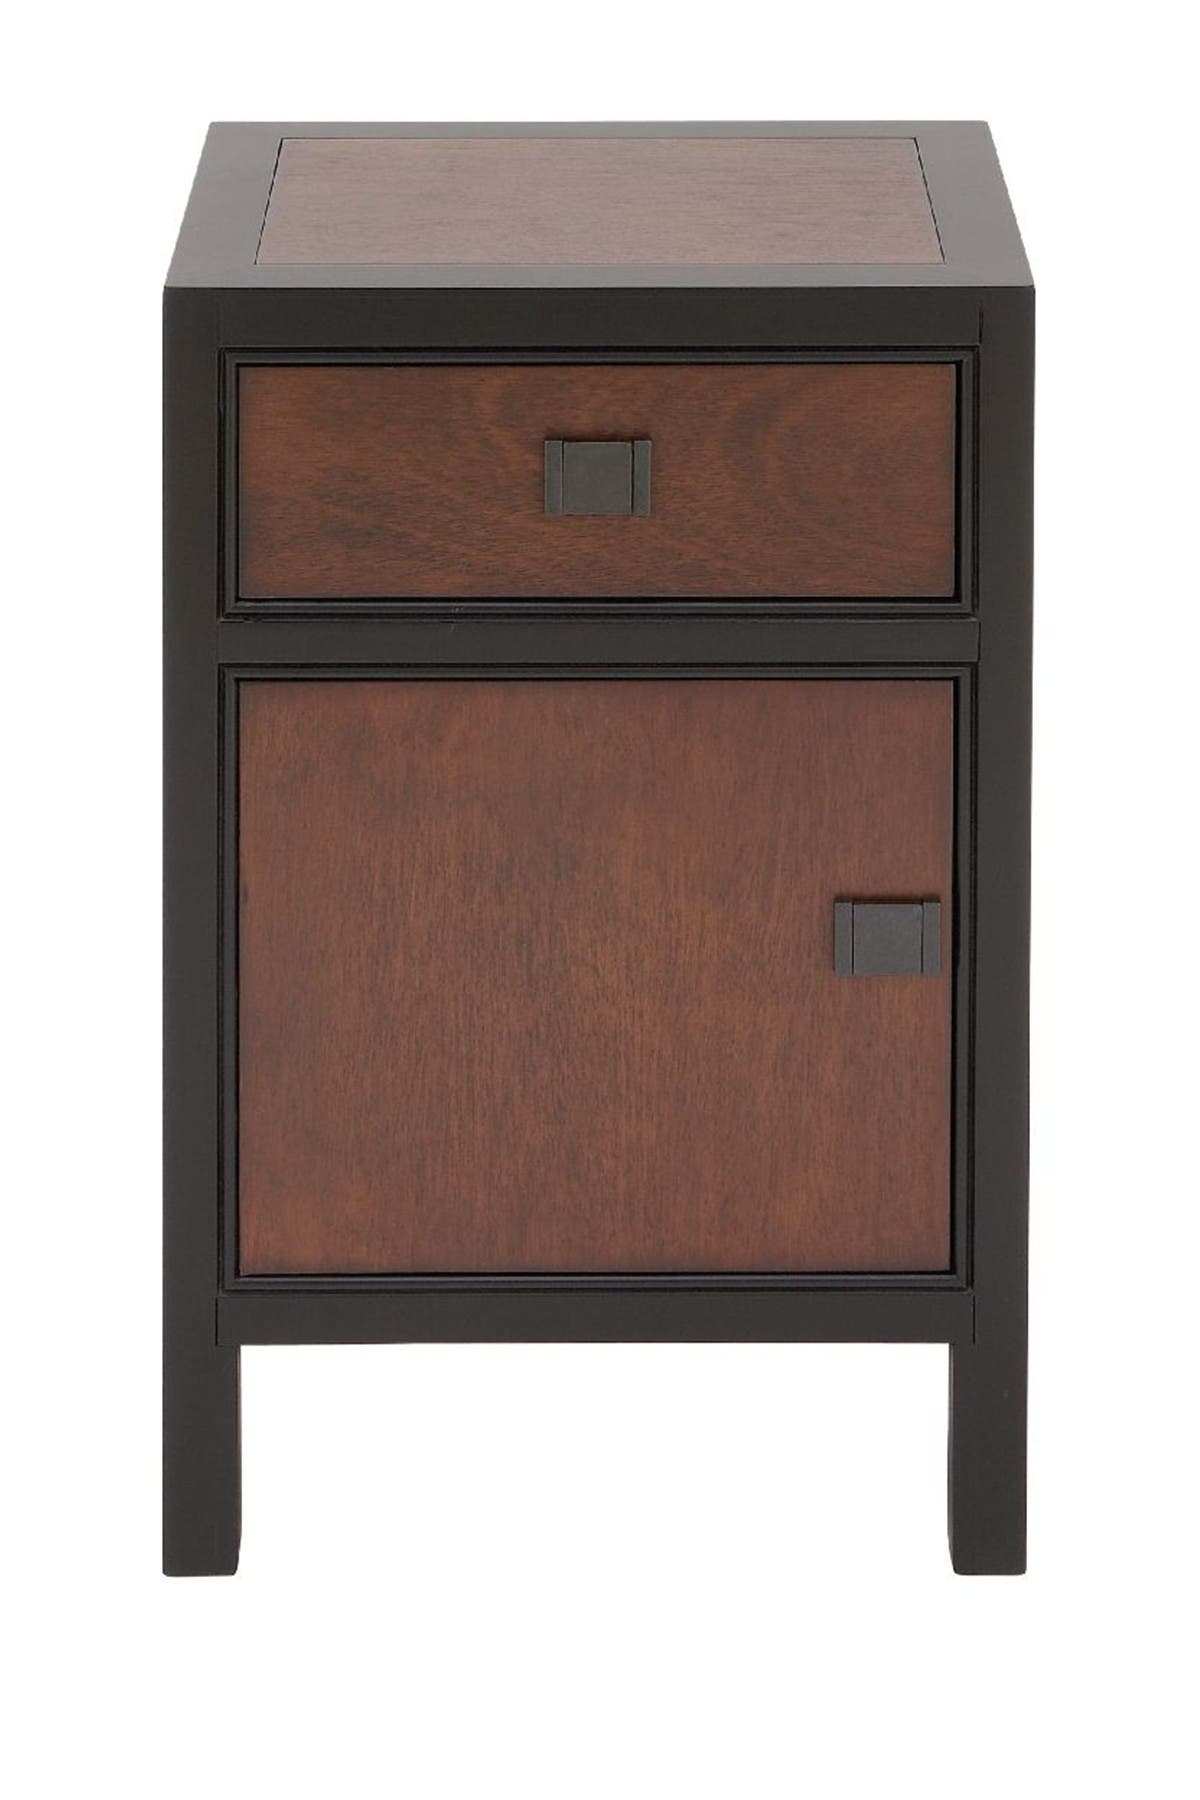 Willow Row Black/brown Contemporary Night Stand